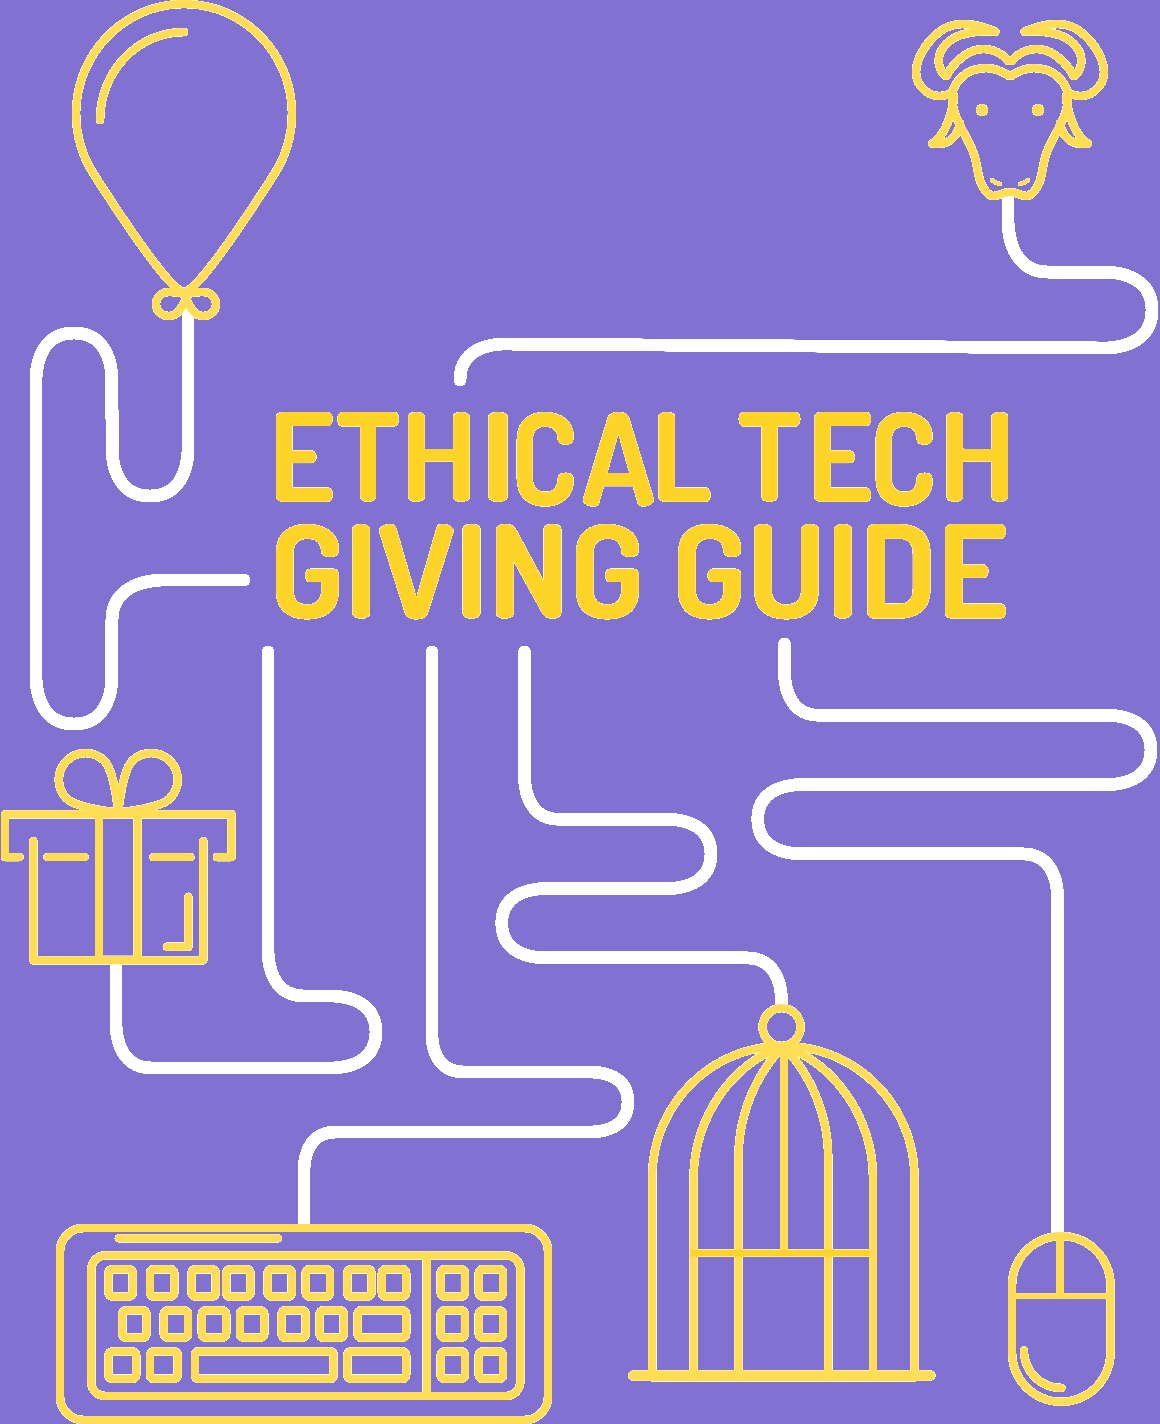 The thirteenth edition of the <i>Ethical Tech Giving Guide</i> is here!